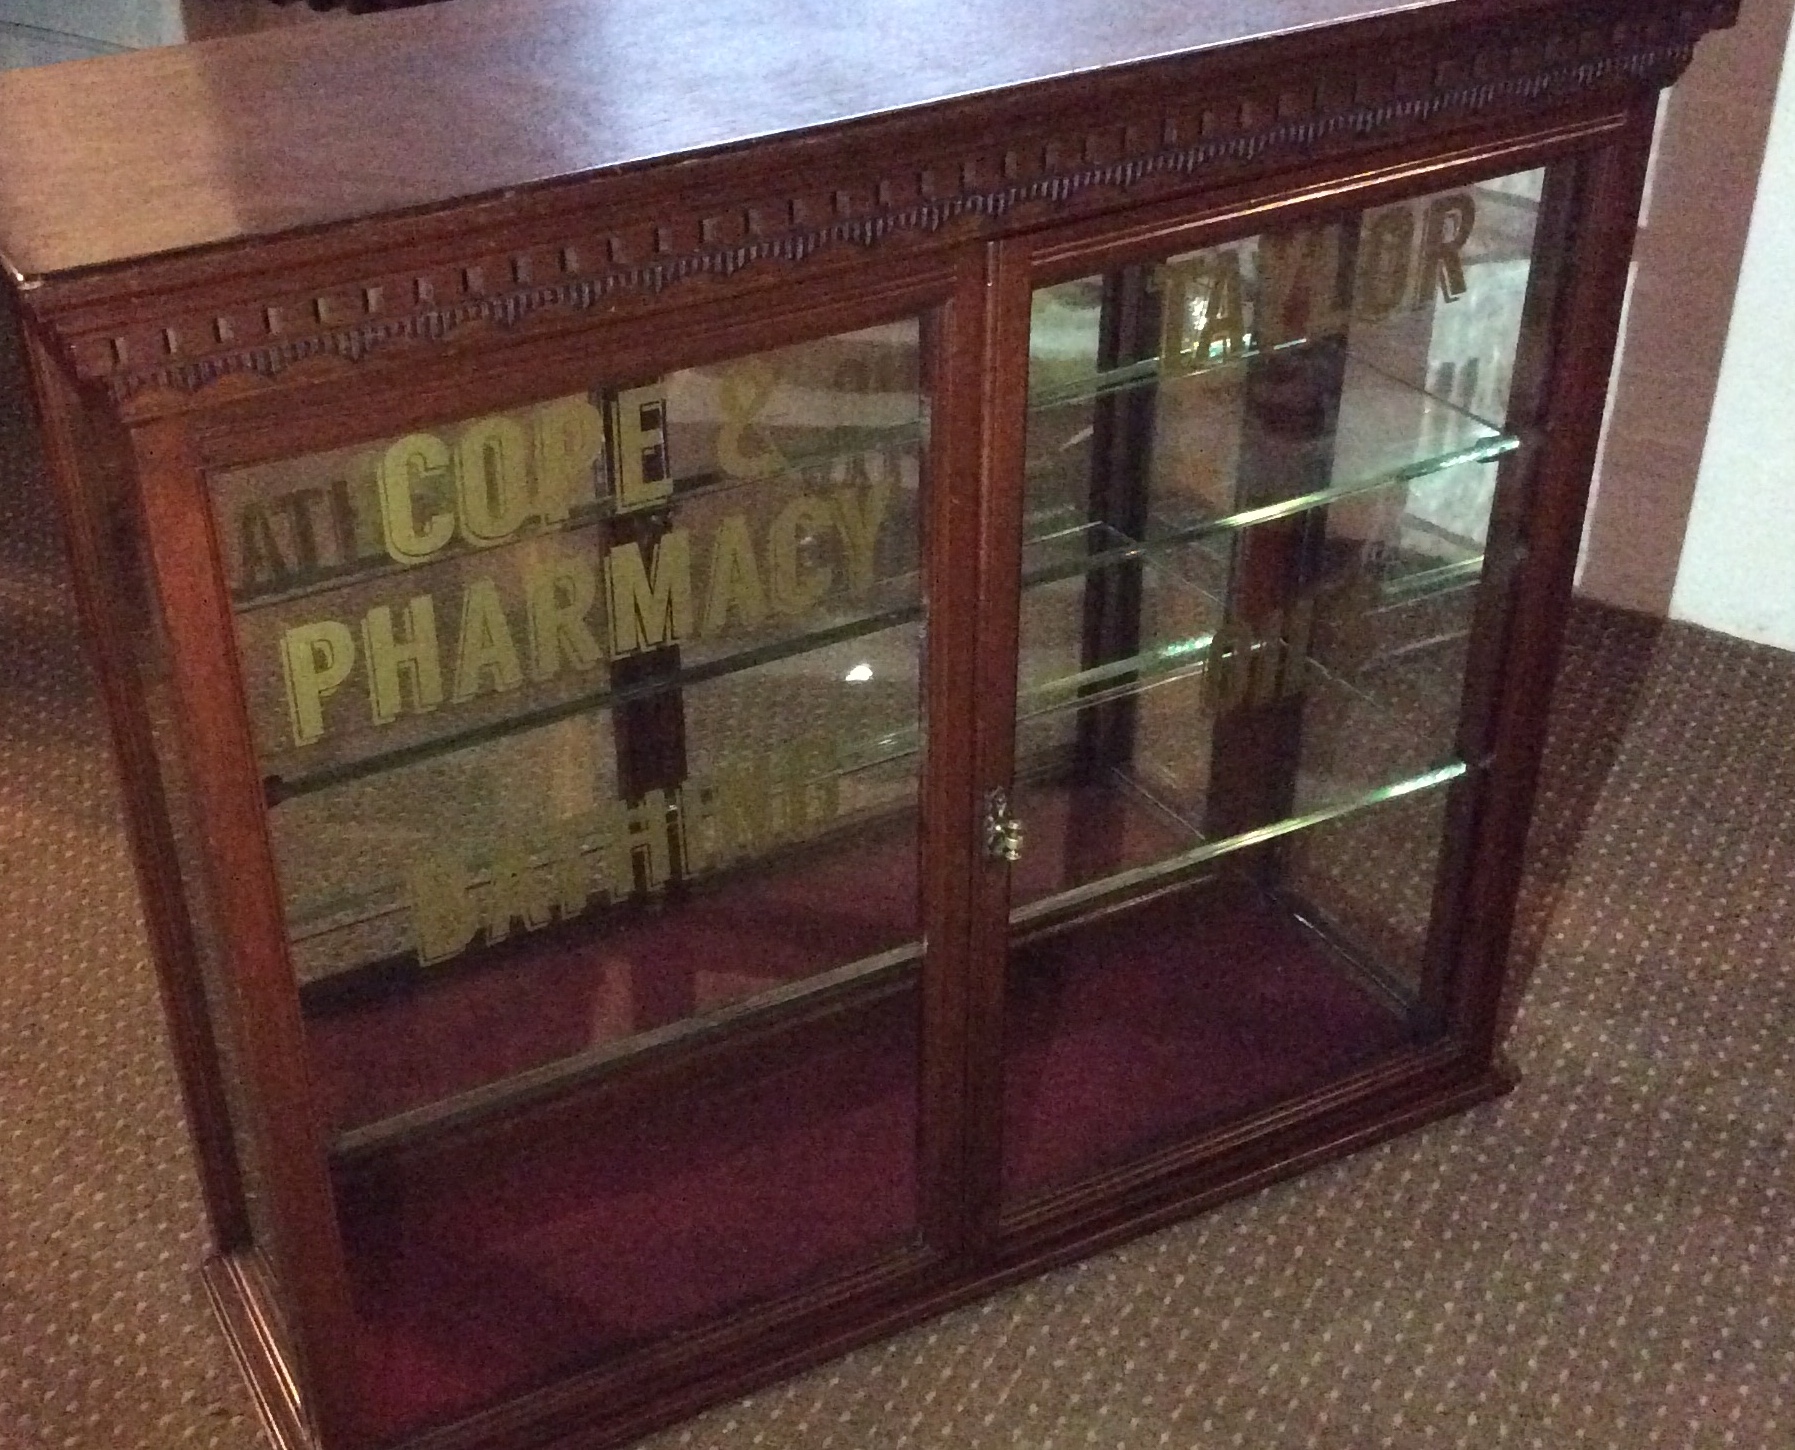 Collectable Antique 1910 mahogany Pharmaceuticals shop cabinet Cole & Taylor